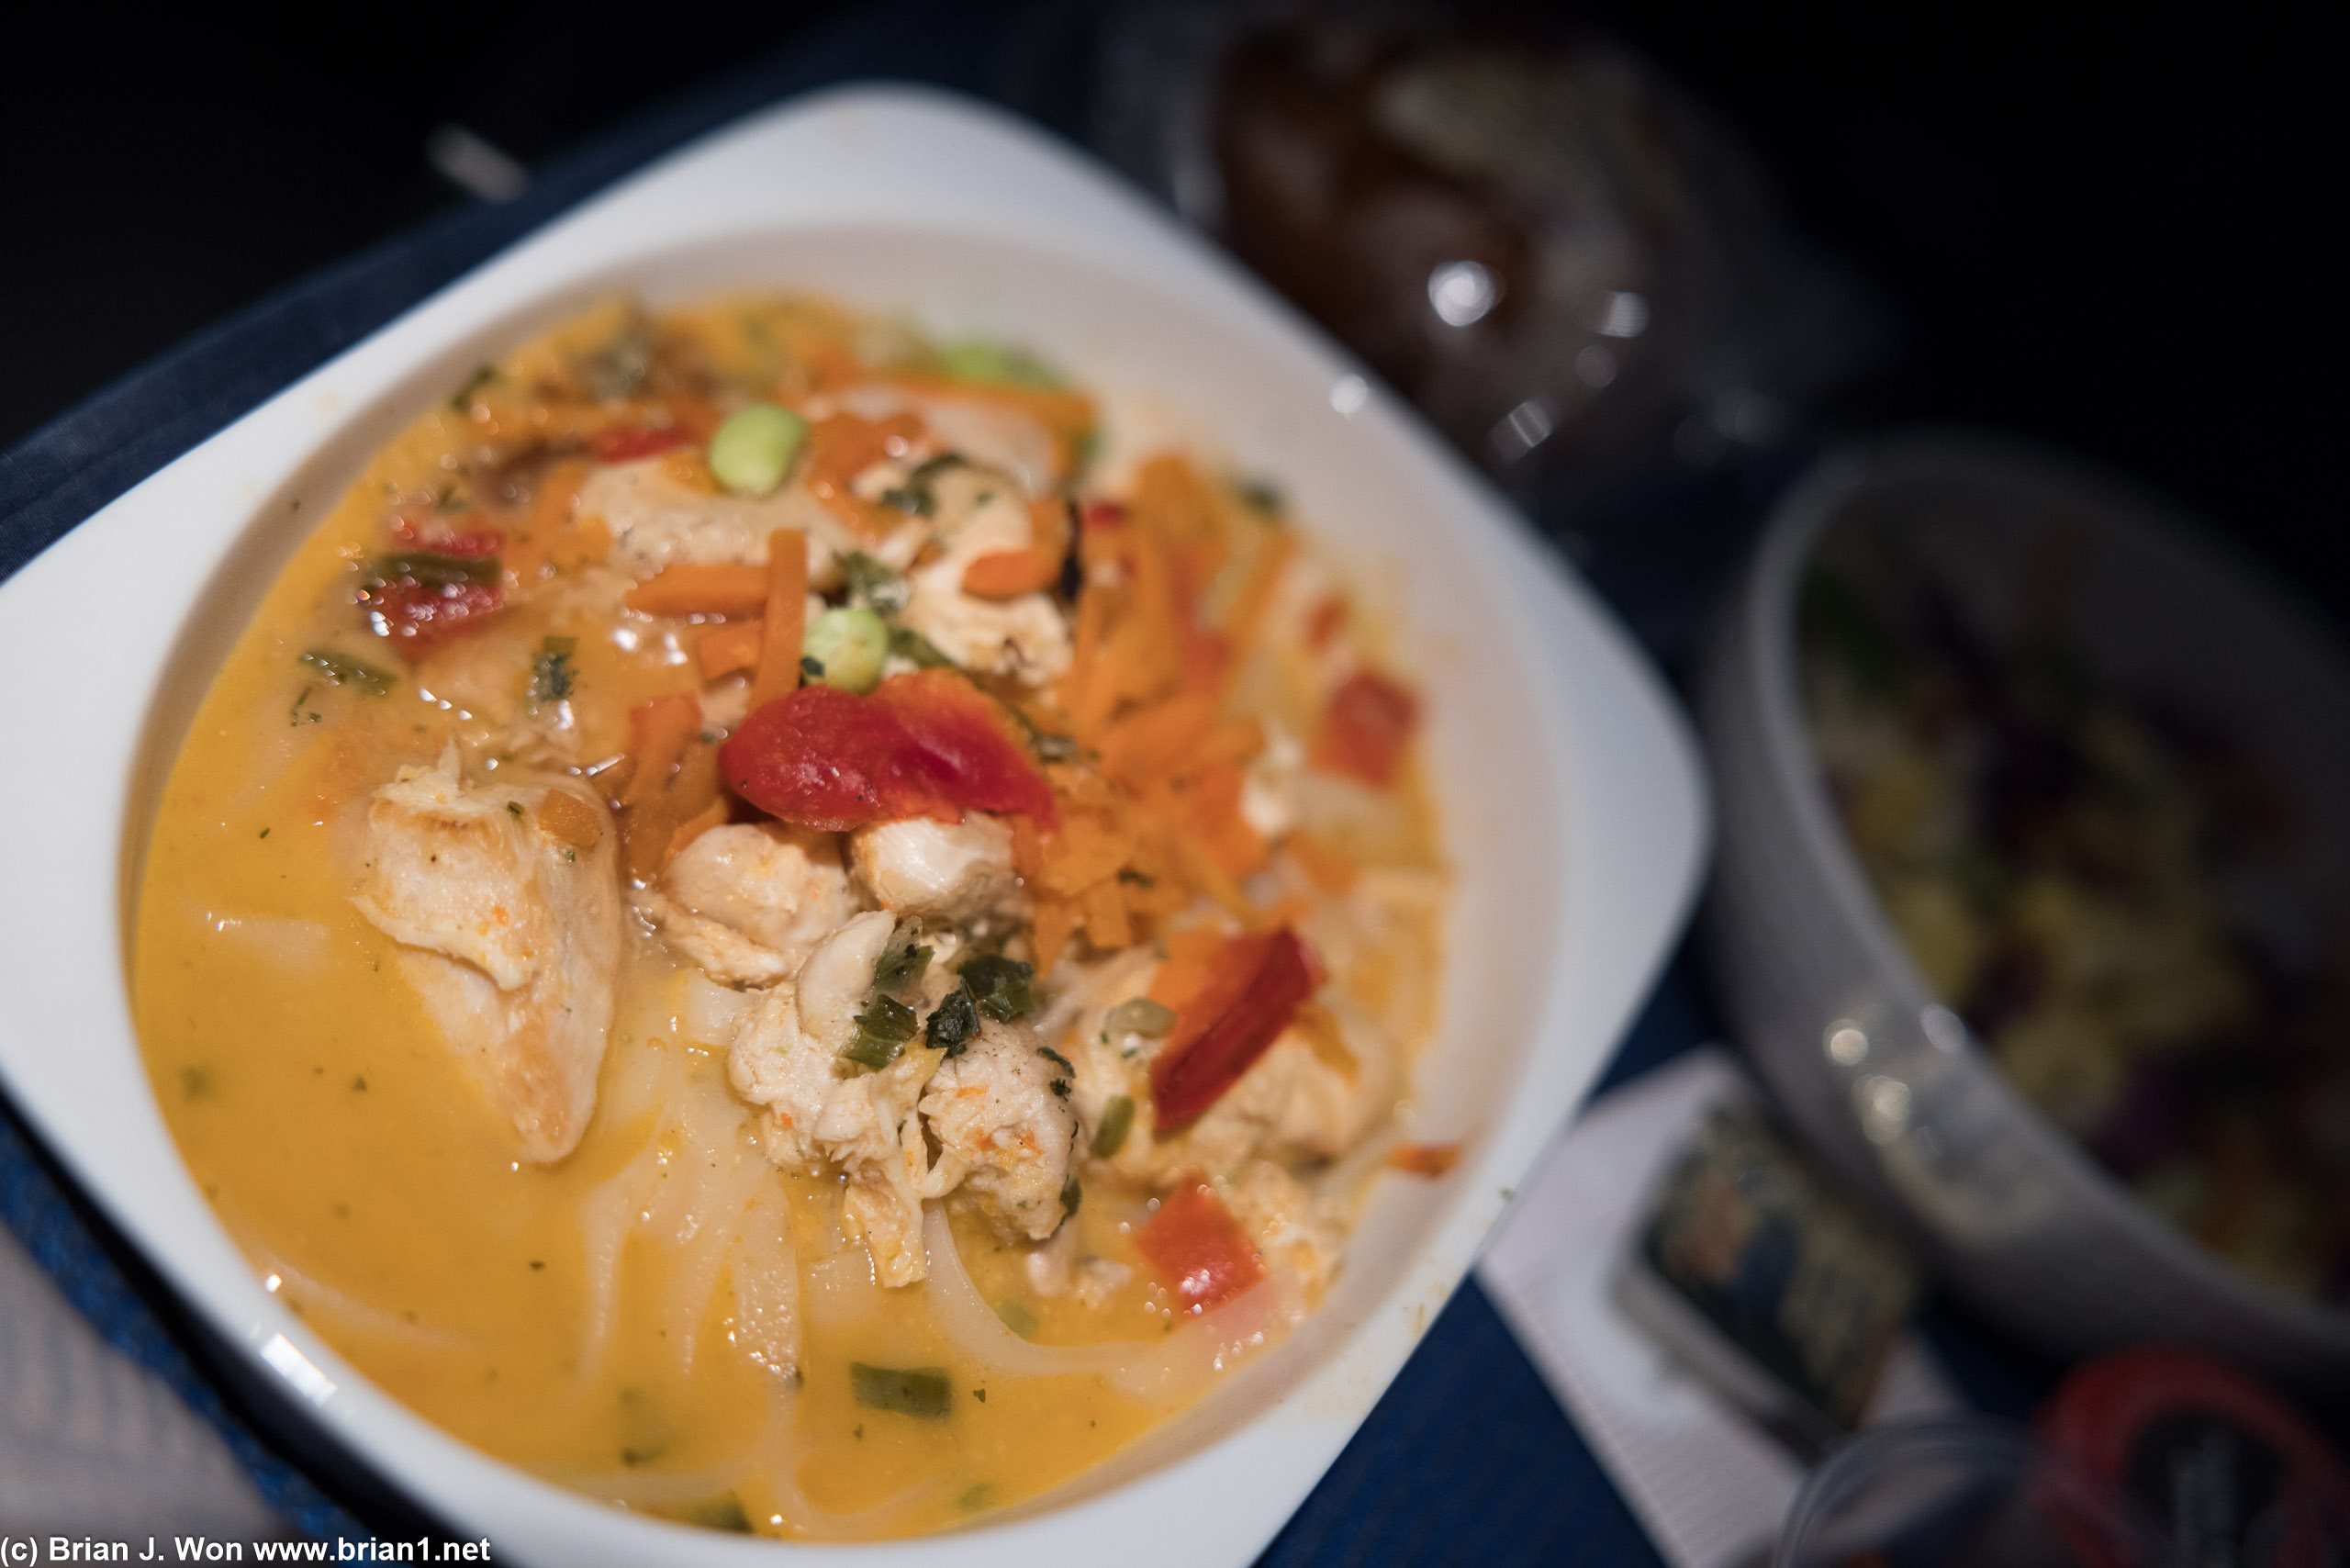 The Thai chicken noodle on EWR-LAX. Looks gross but tastes better than it looks.